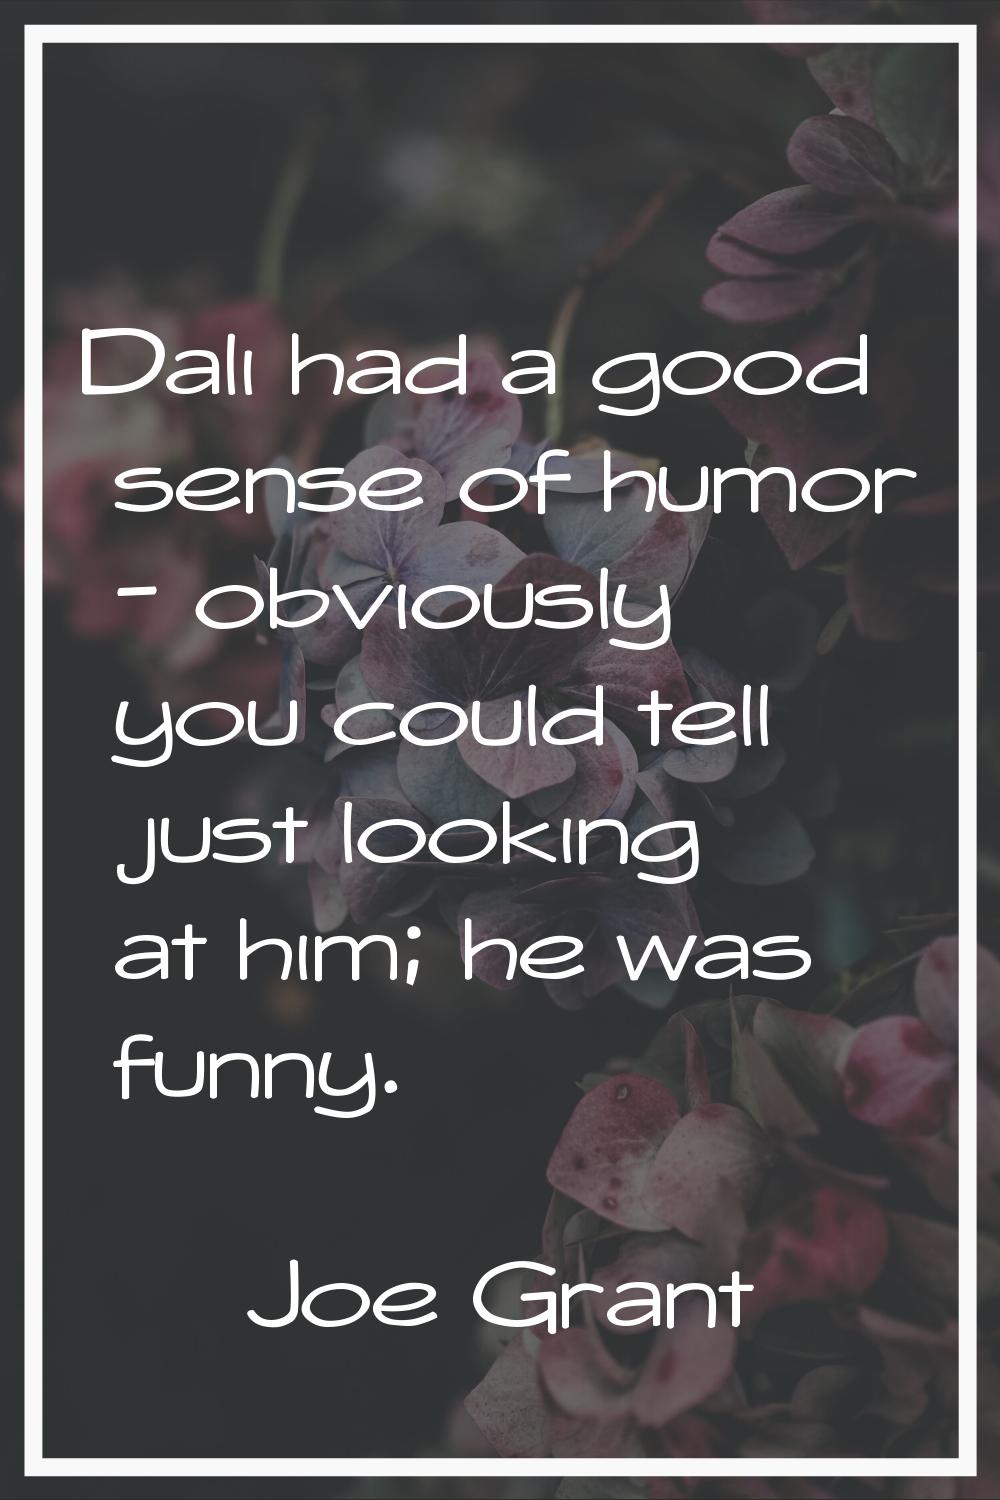 Dali had a good sense of humor - obviously you could tell just looking at him; he was funny.